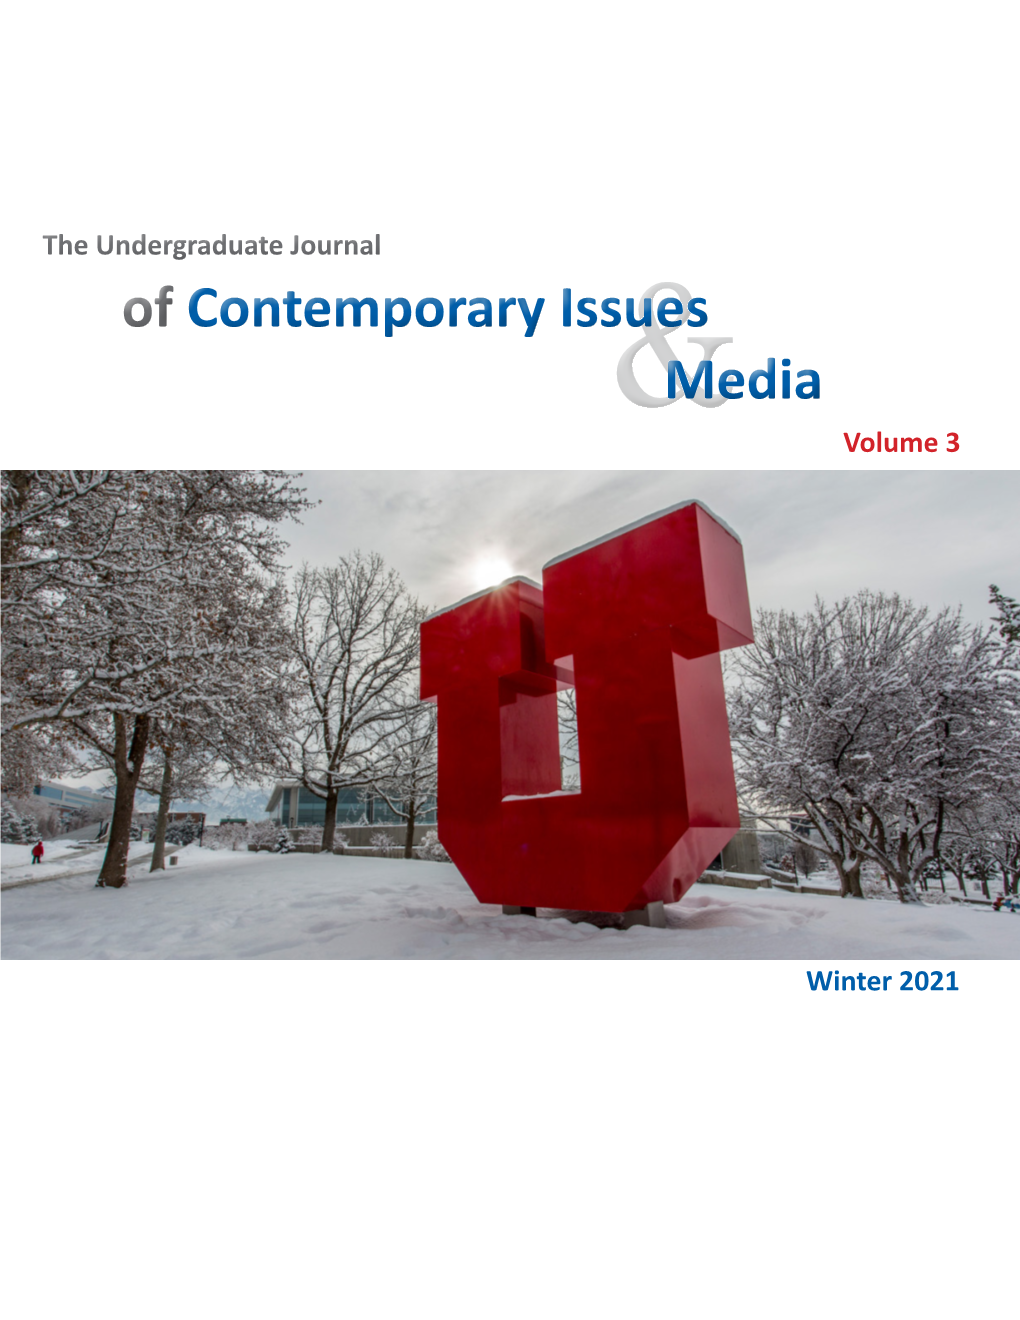 Undergraduate Journal of Contemporary Issues and Media